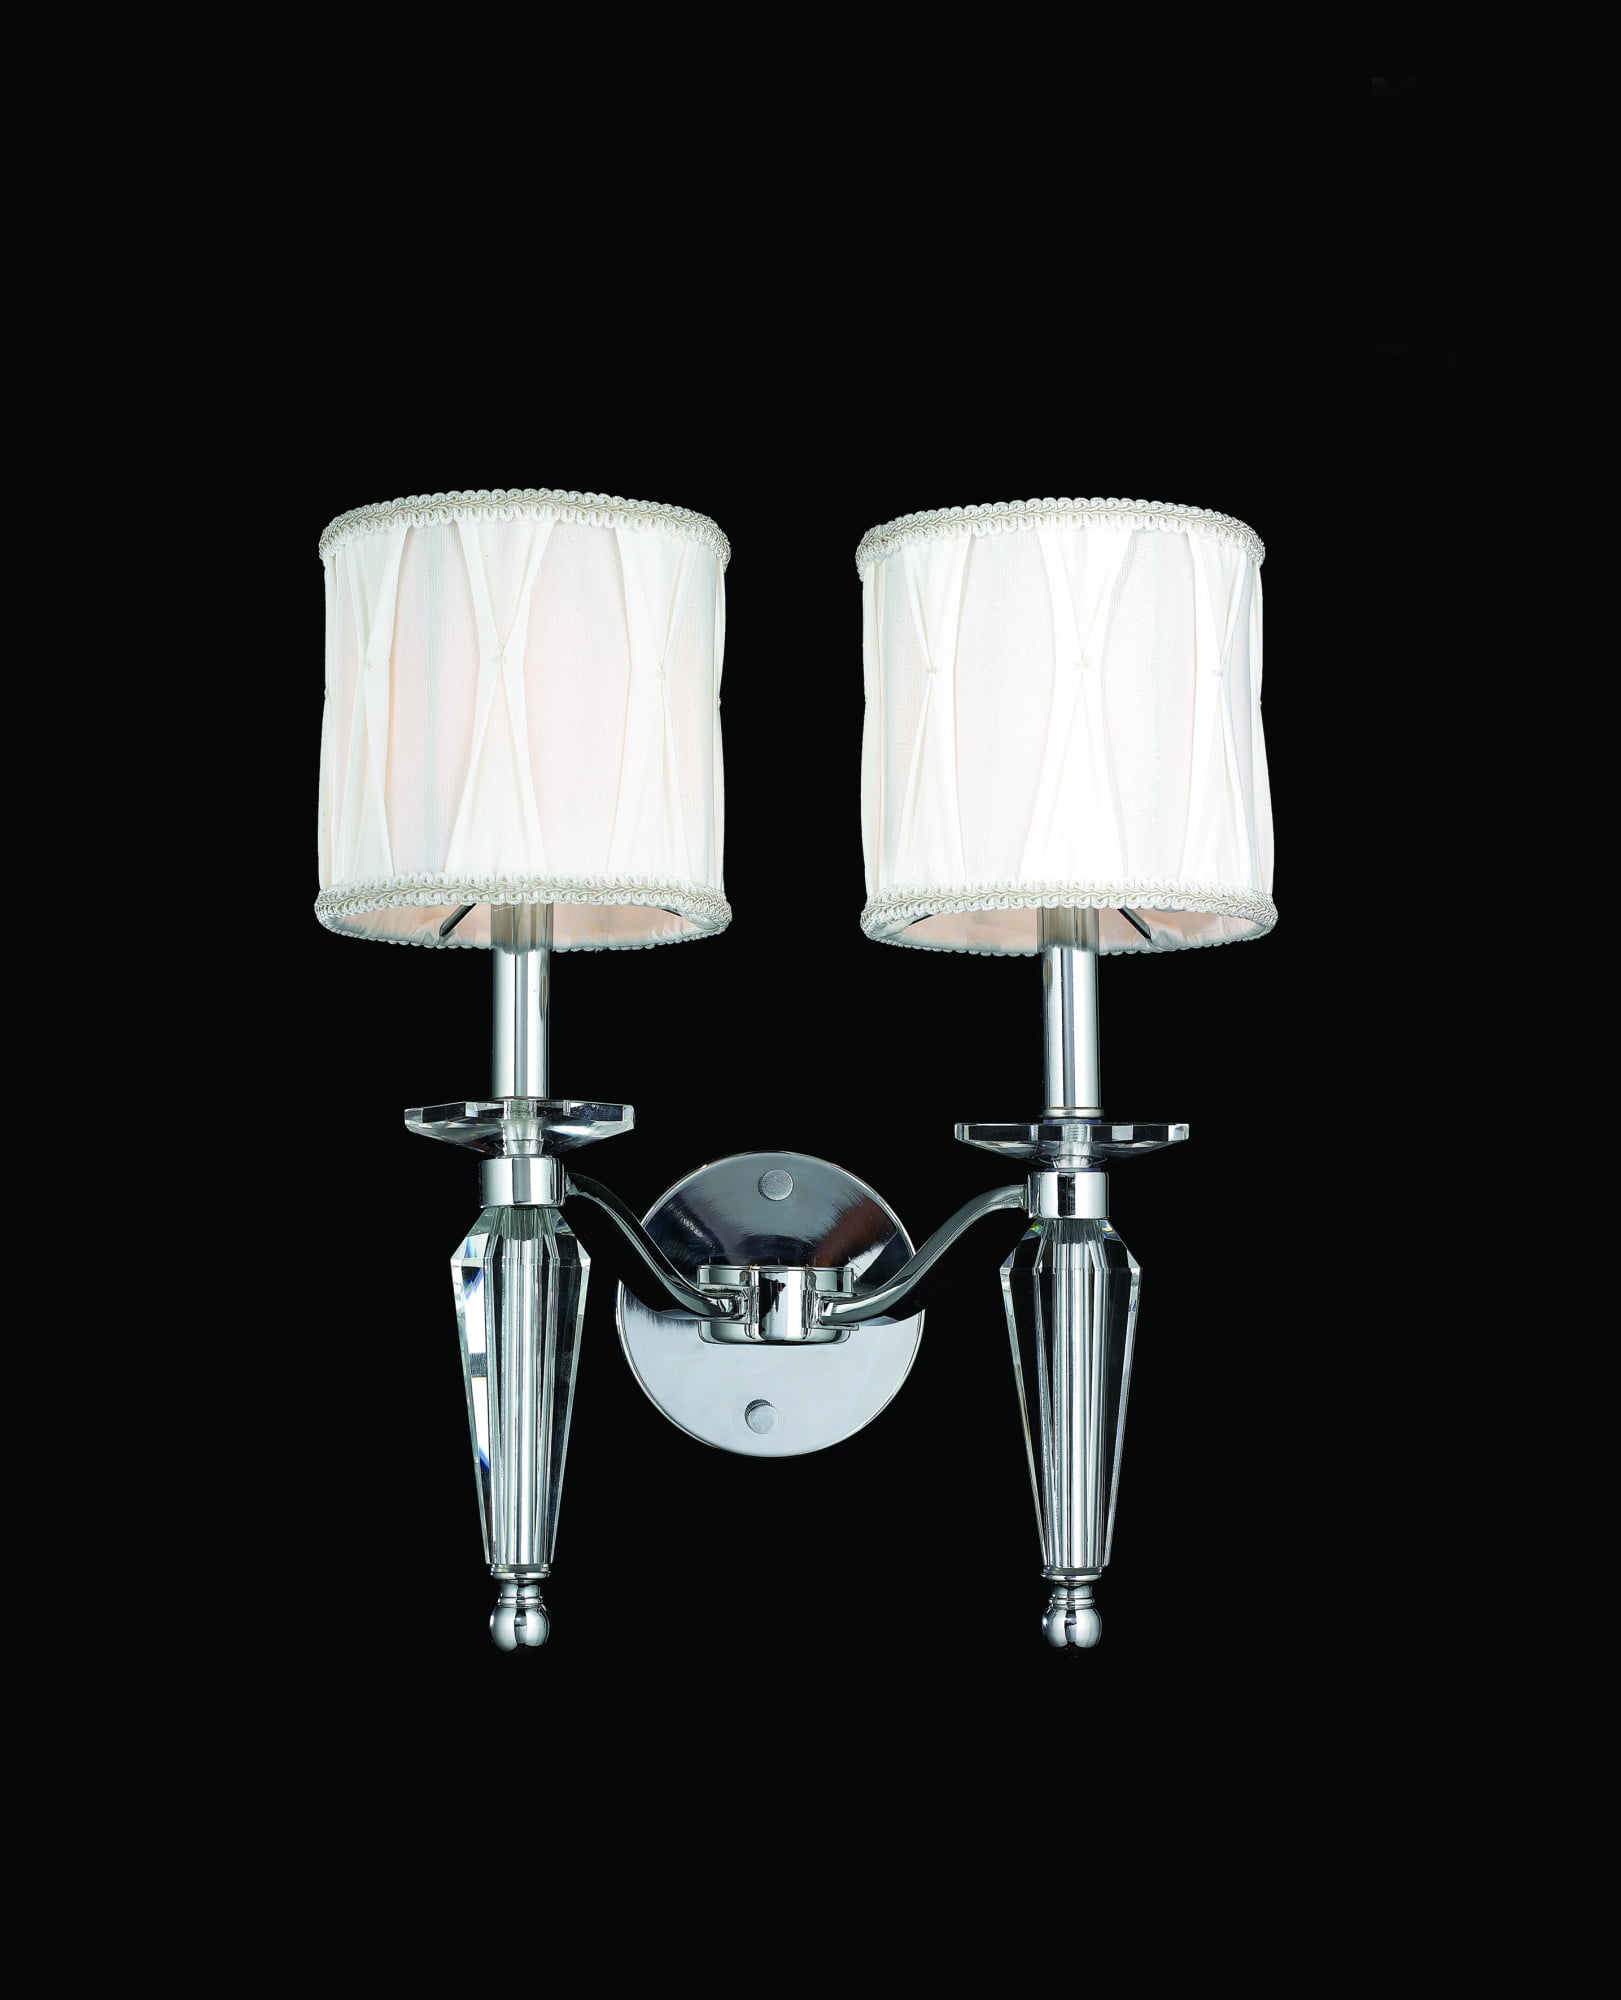 Gatsby Collection 2 Light Arm Chrome Finish and Clear Crystal Wall Sconce with White Fabric Shade 13